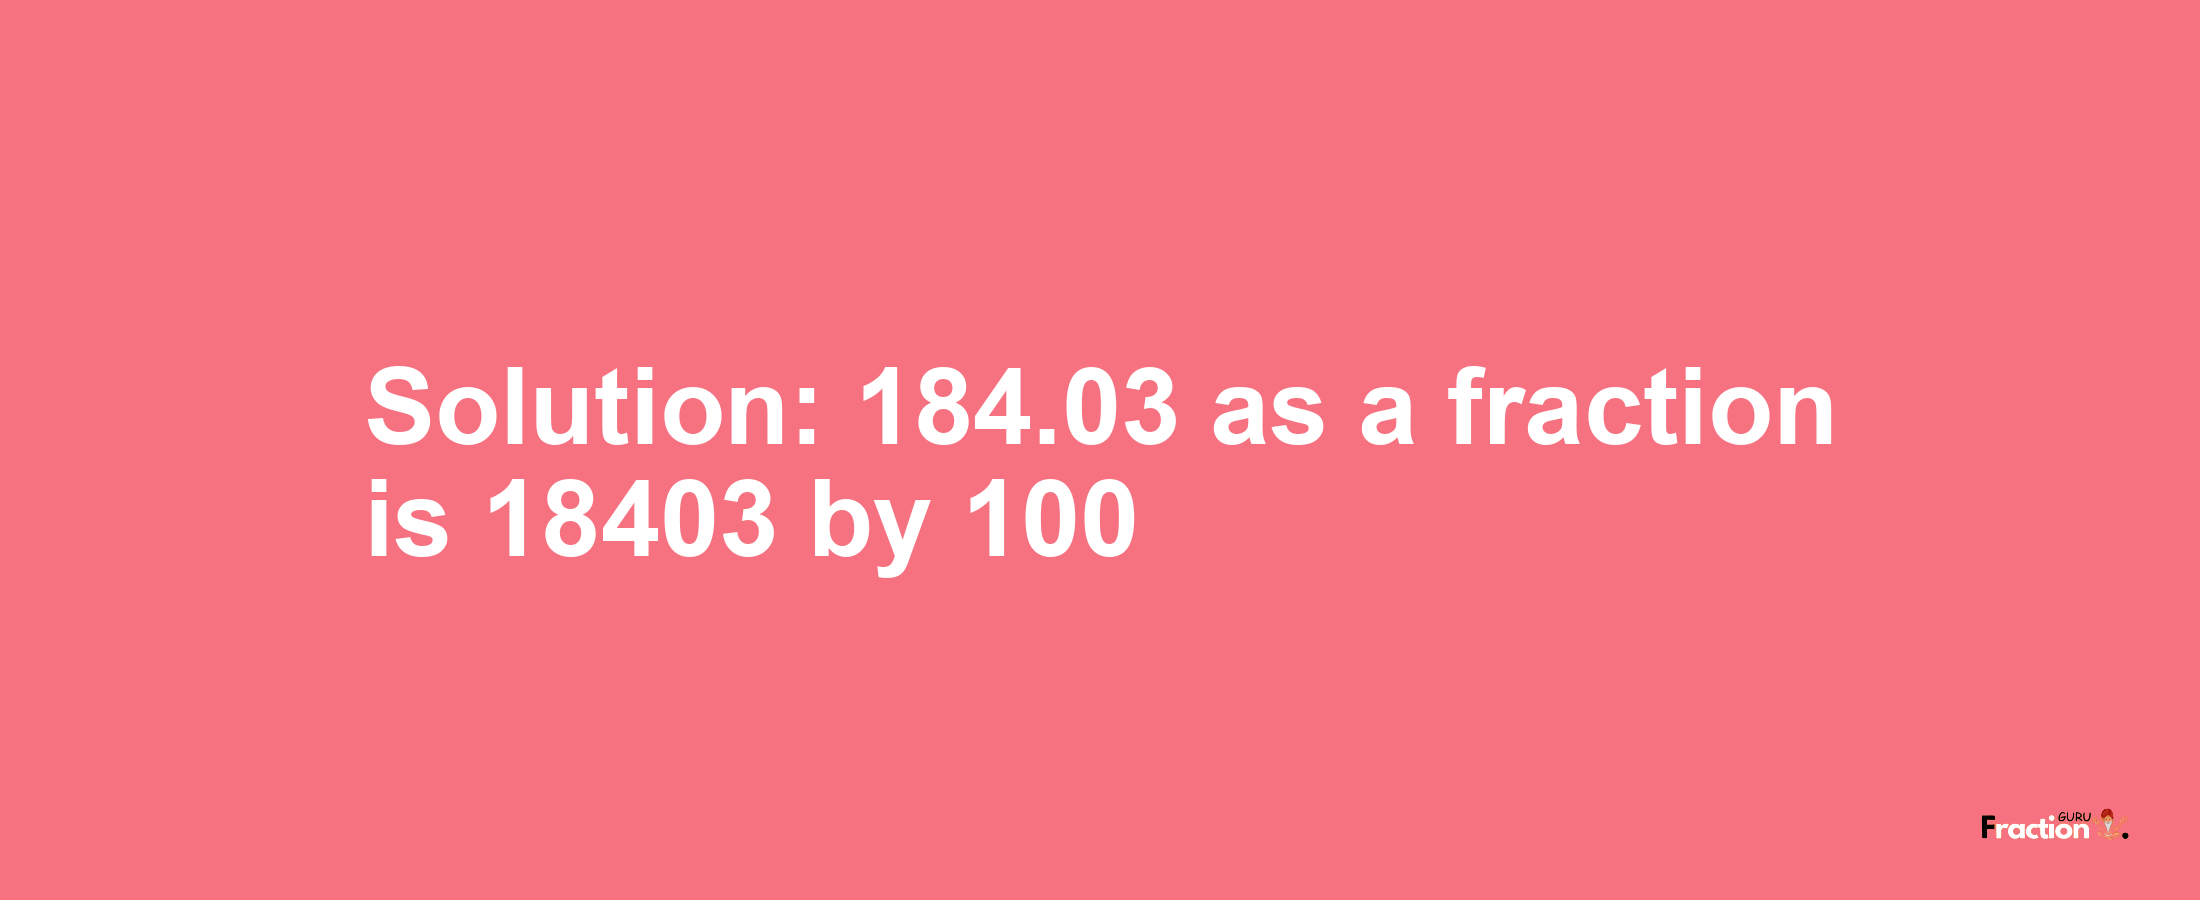 Solution:184.03 as a fraction is 18403/100